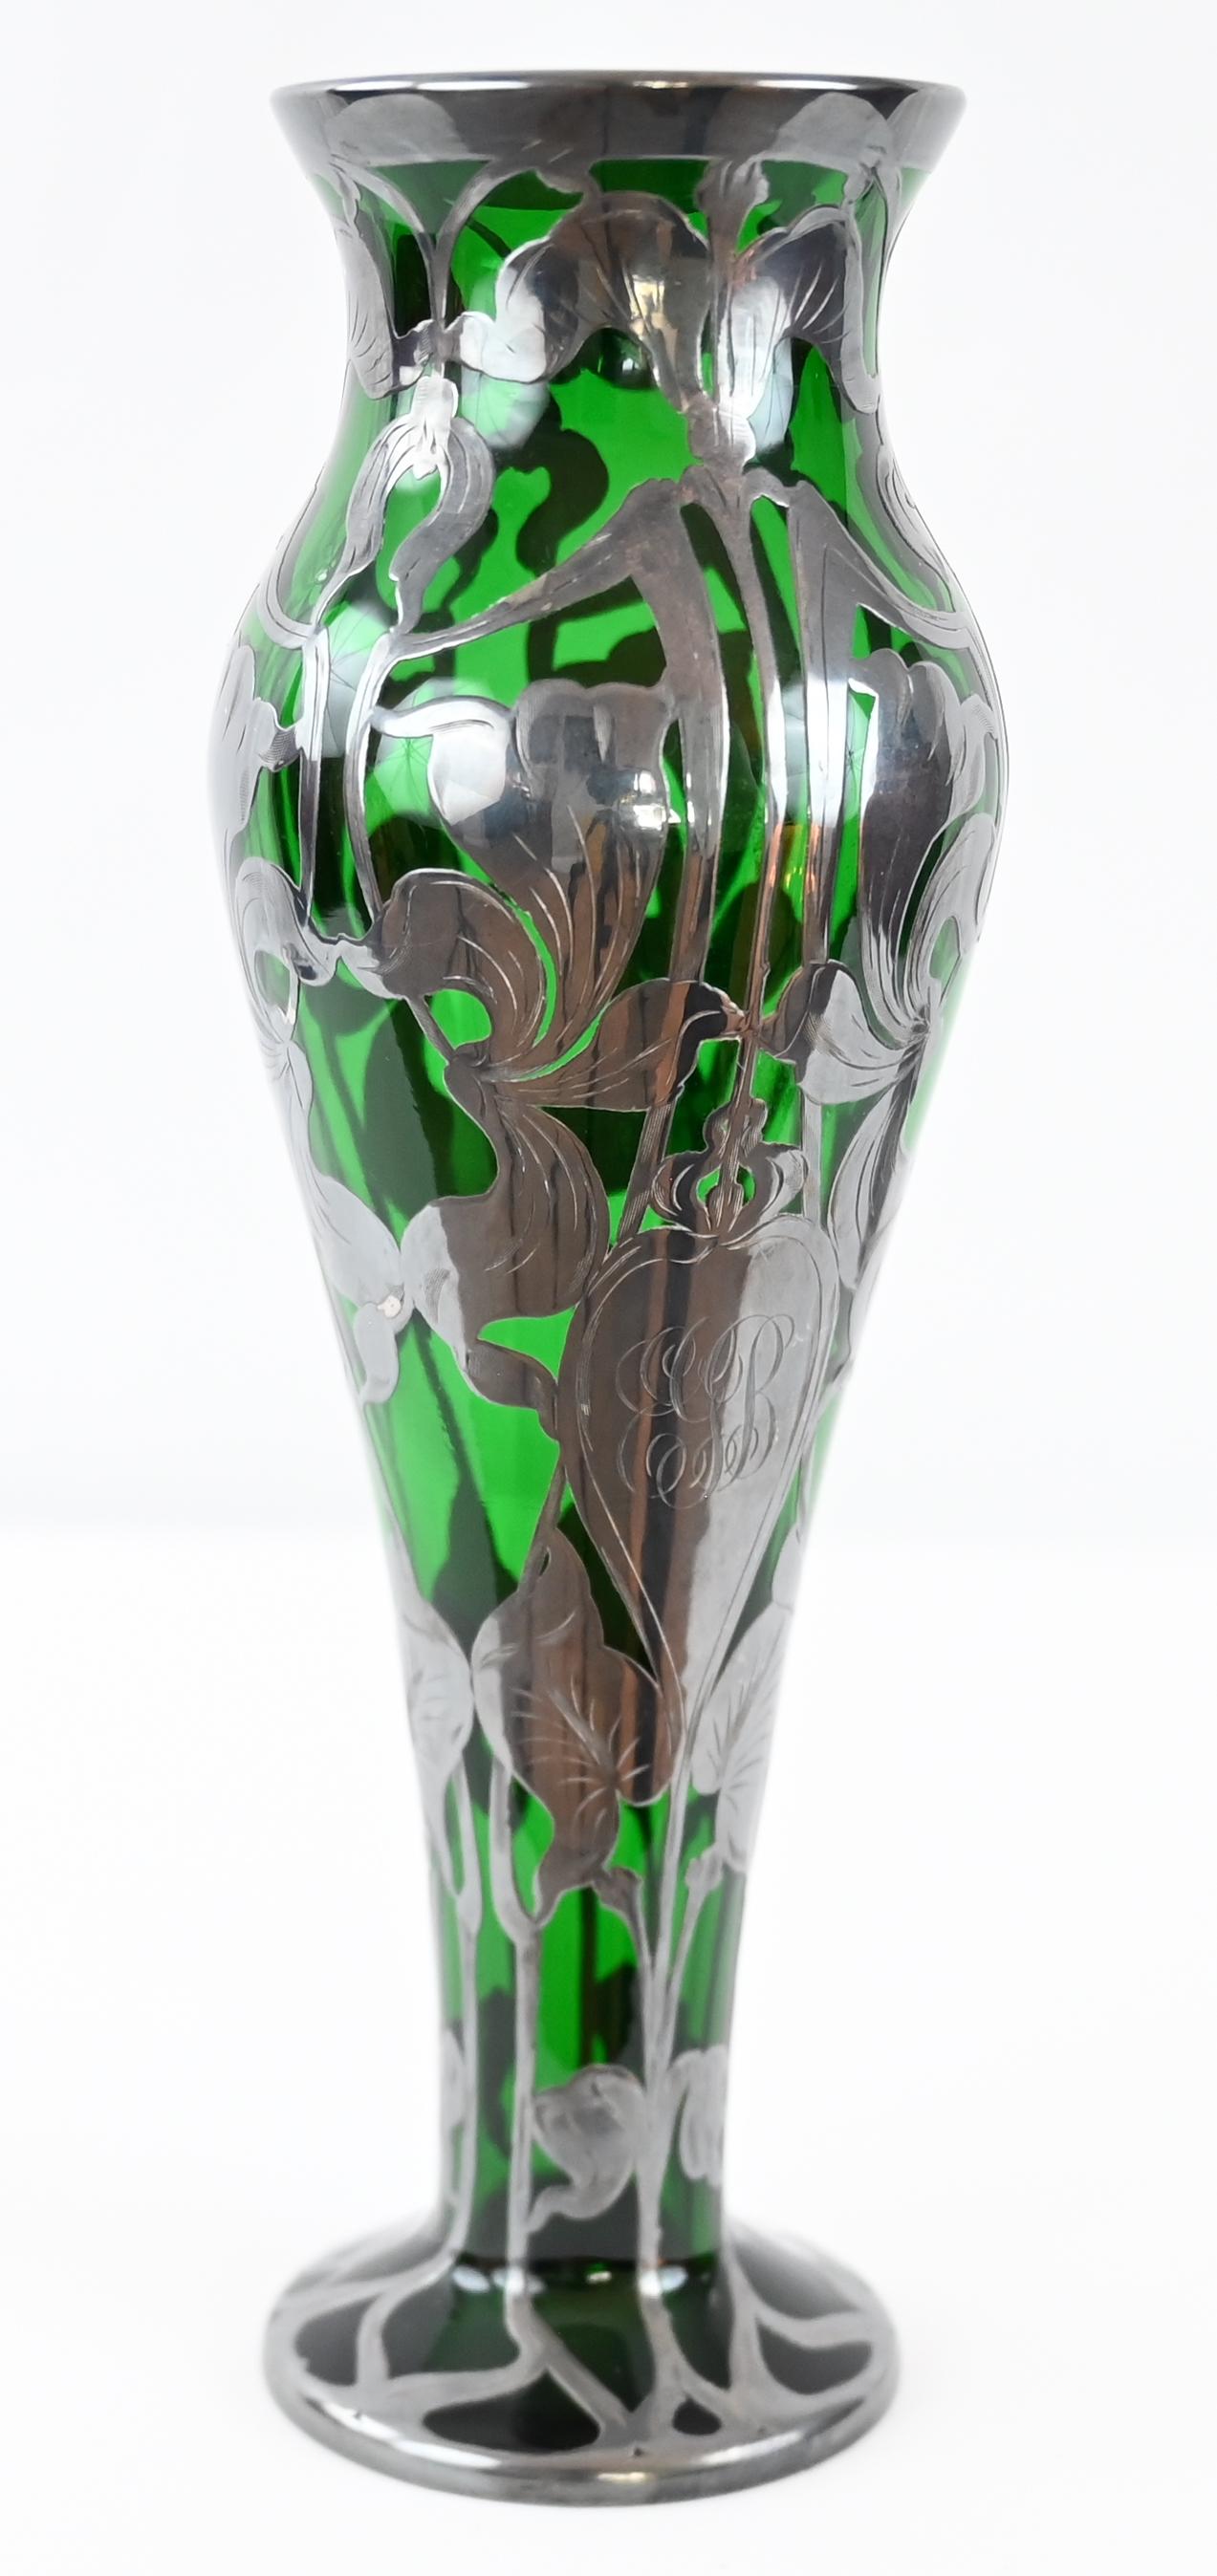 A fine quality Art Nouveau art glass vase, by Loetz the historic glass maker from the municipality of Austria featuring engraved Alvin Sterling 
Silver overlay. Overlay in form of open and horizontal patterns with stylized leaves and scrollwork.